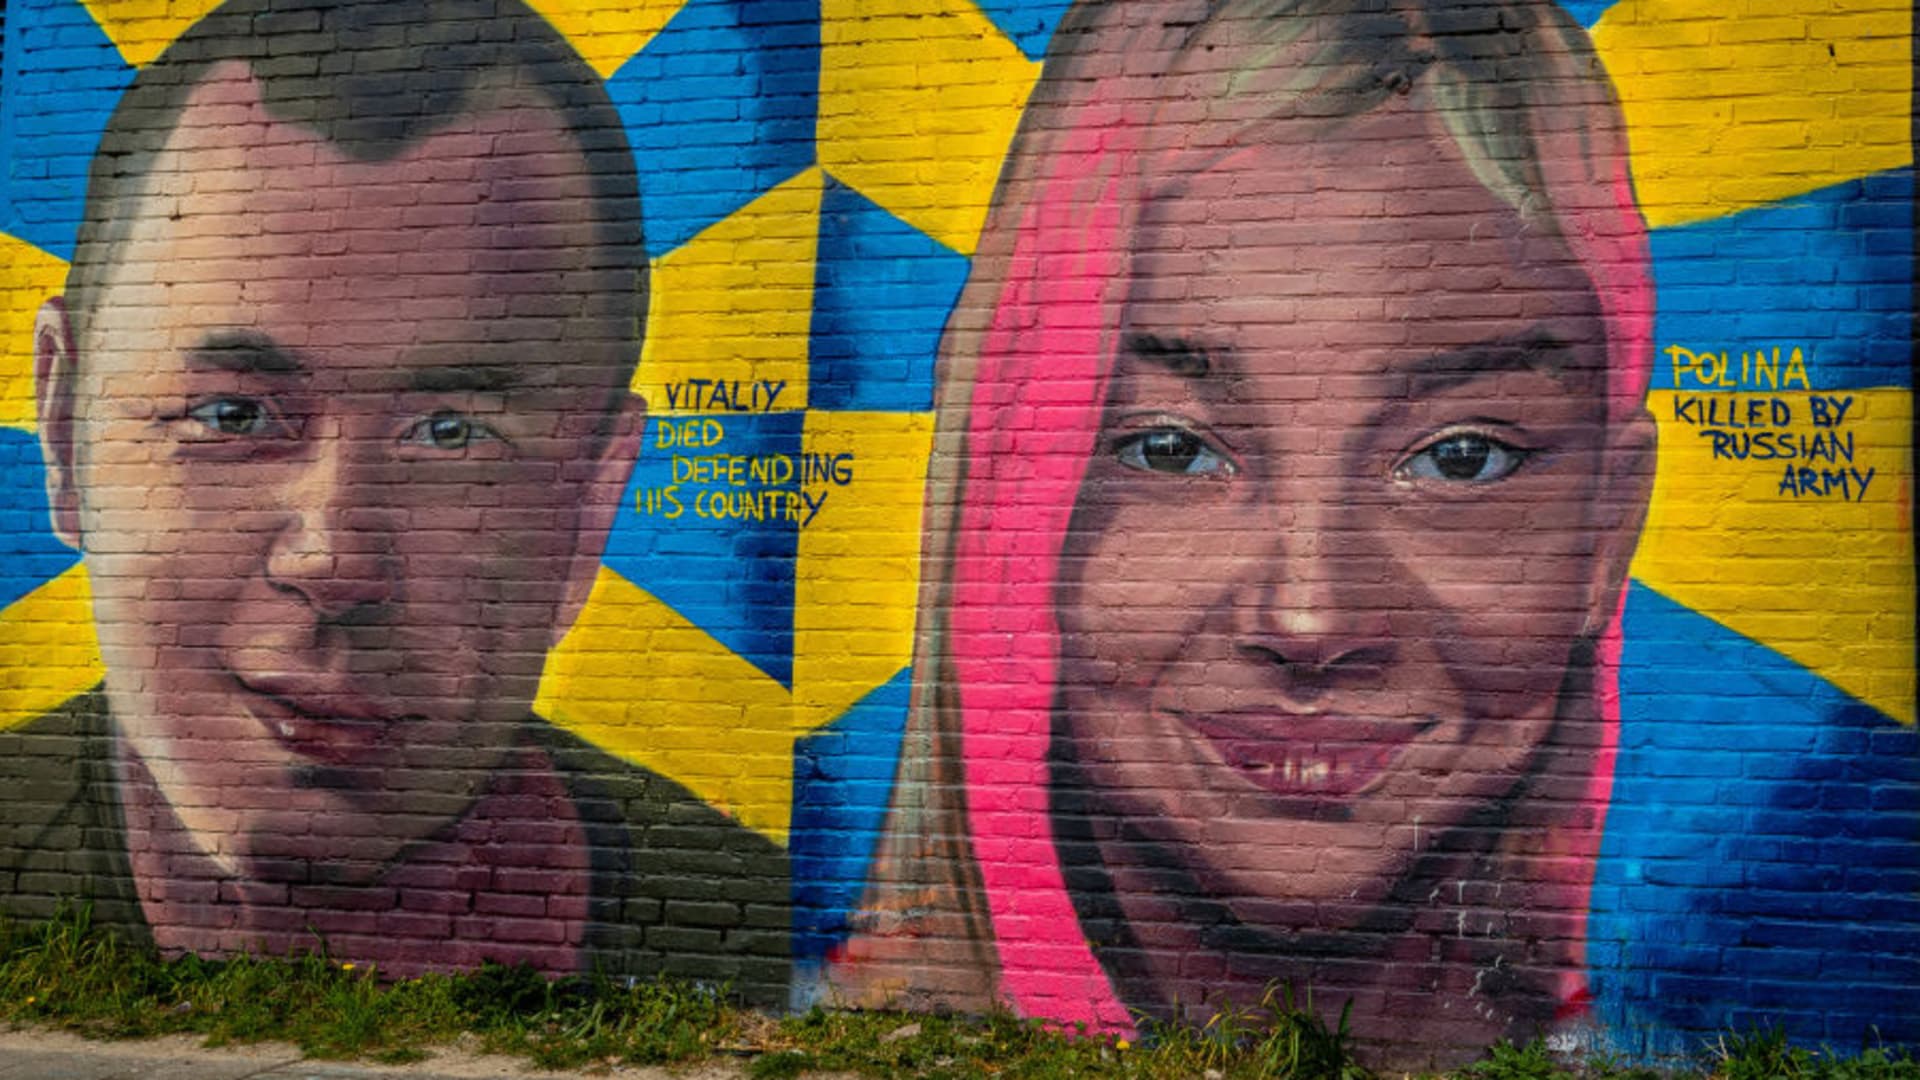 Murals of two young Ukrainian victims portrayed on the wall. On the left, Vitaliy Skakun Volodymyrovych (1996-2022) who is seen as a hero by the Ukrainian army for his heroic action during the explosion of a bridge to stop the Russian army, on the right, 10 year old Ukrainian Polina, murdered by Russian soldiers when she and her family tried to flee Kyiv by car.